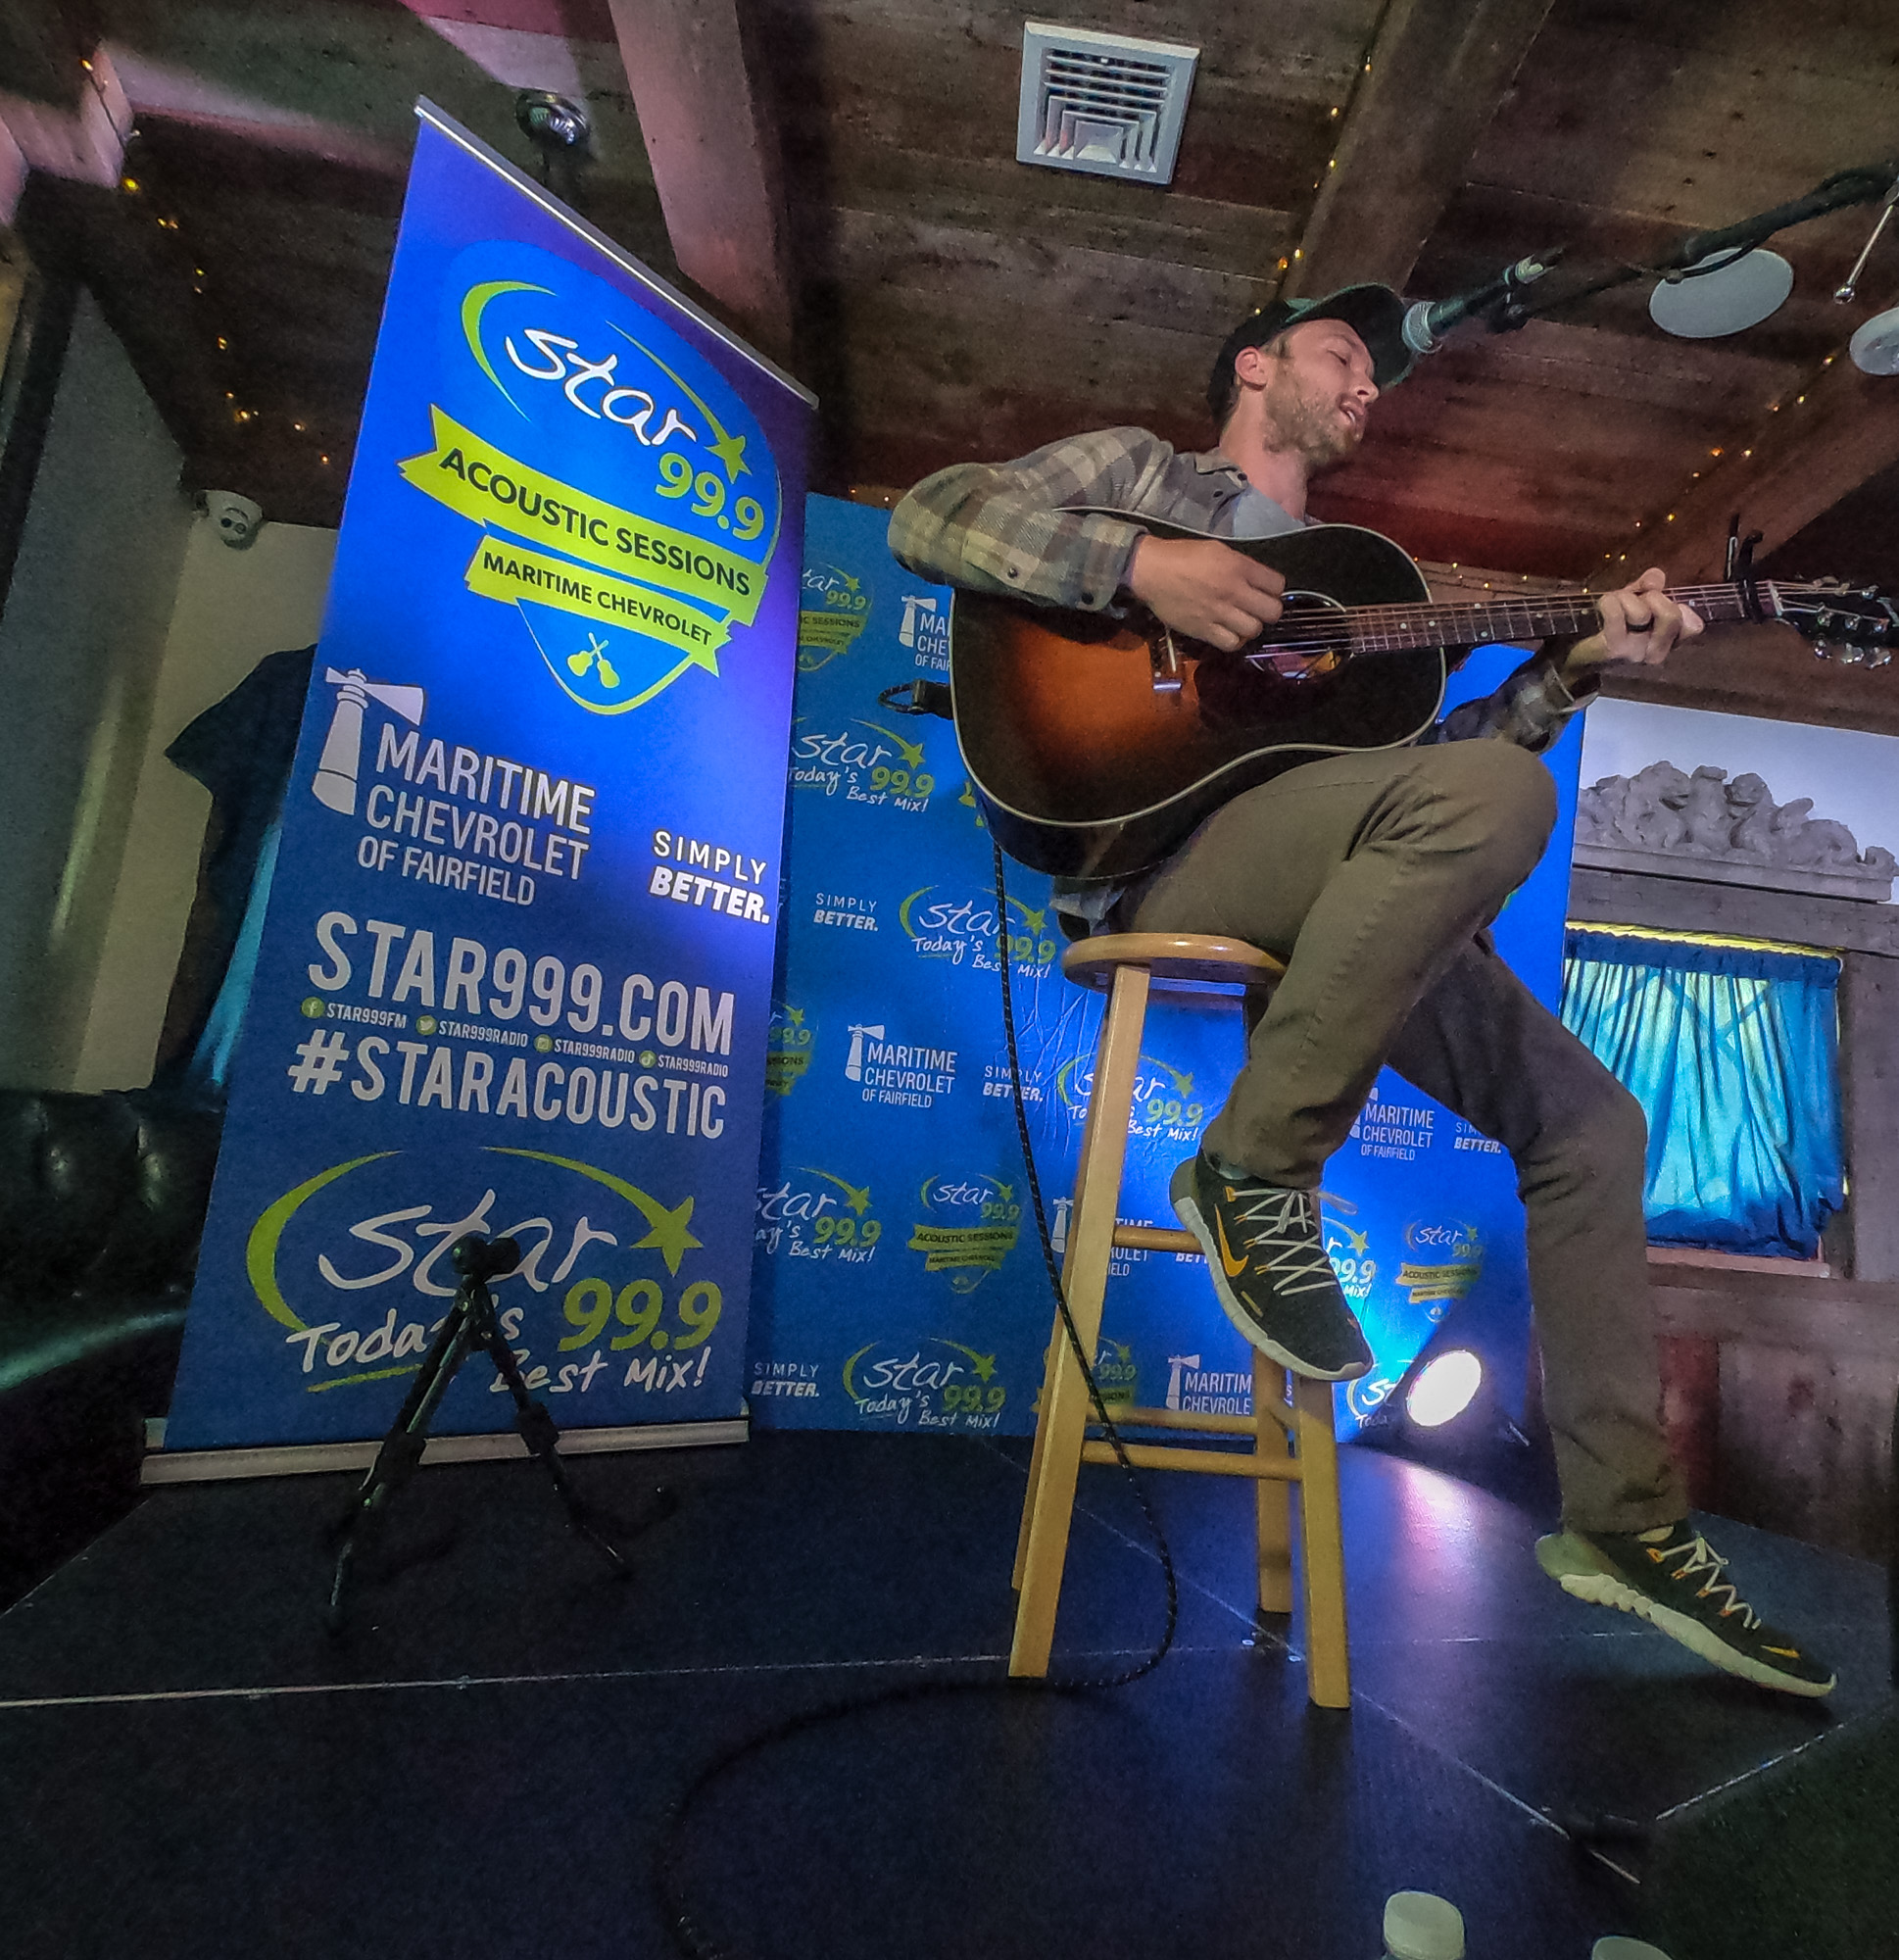 Star 99.9 Maritime Chevrolet Acoustic Session with Phillip Phillips